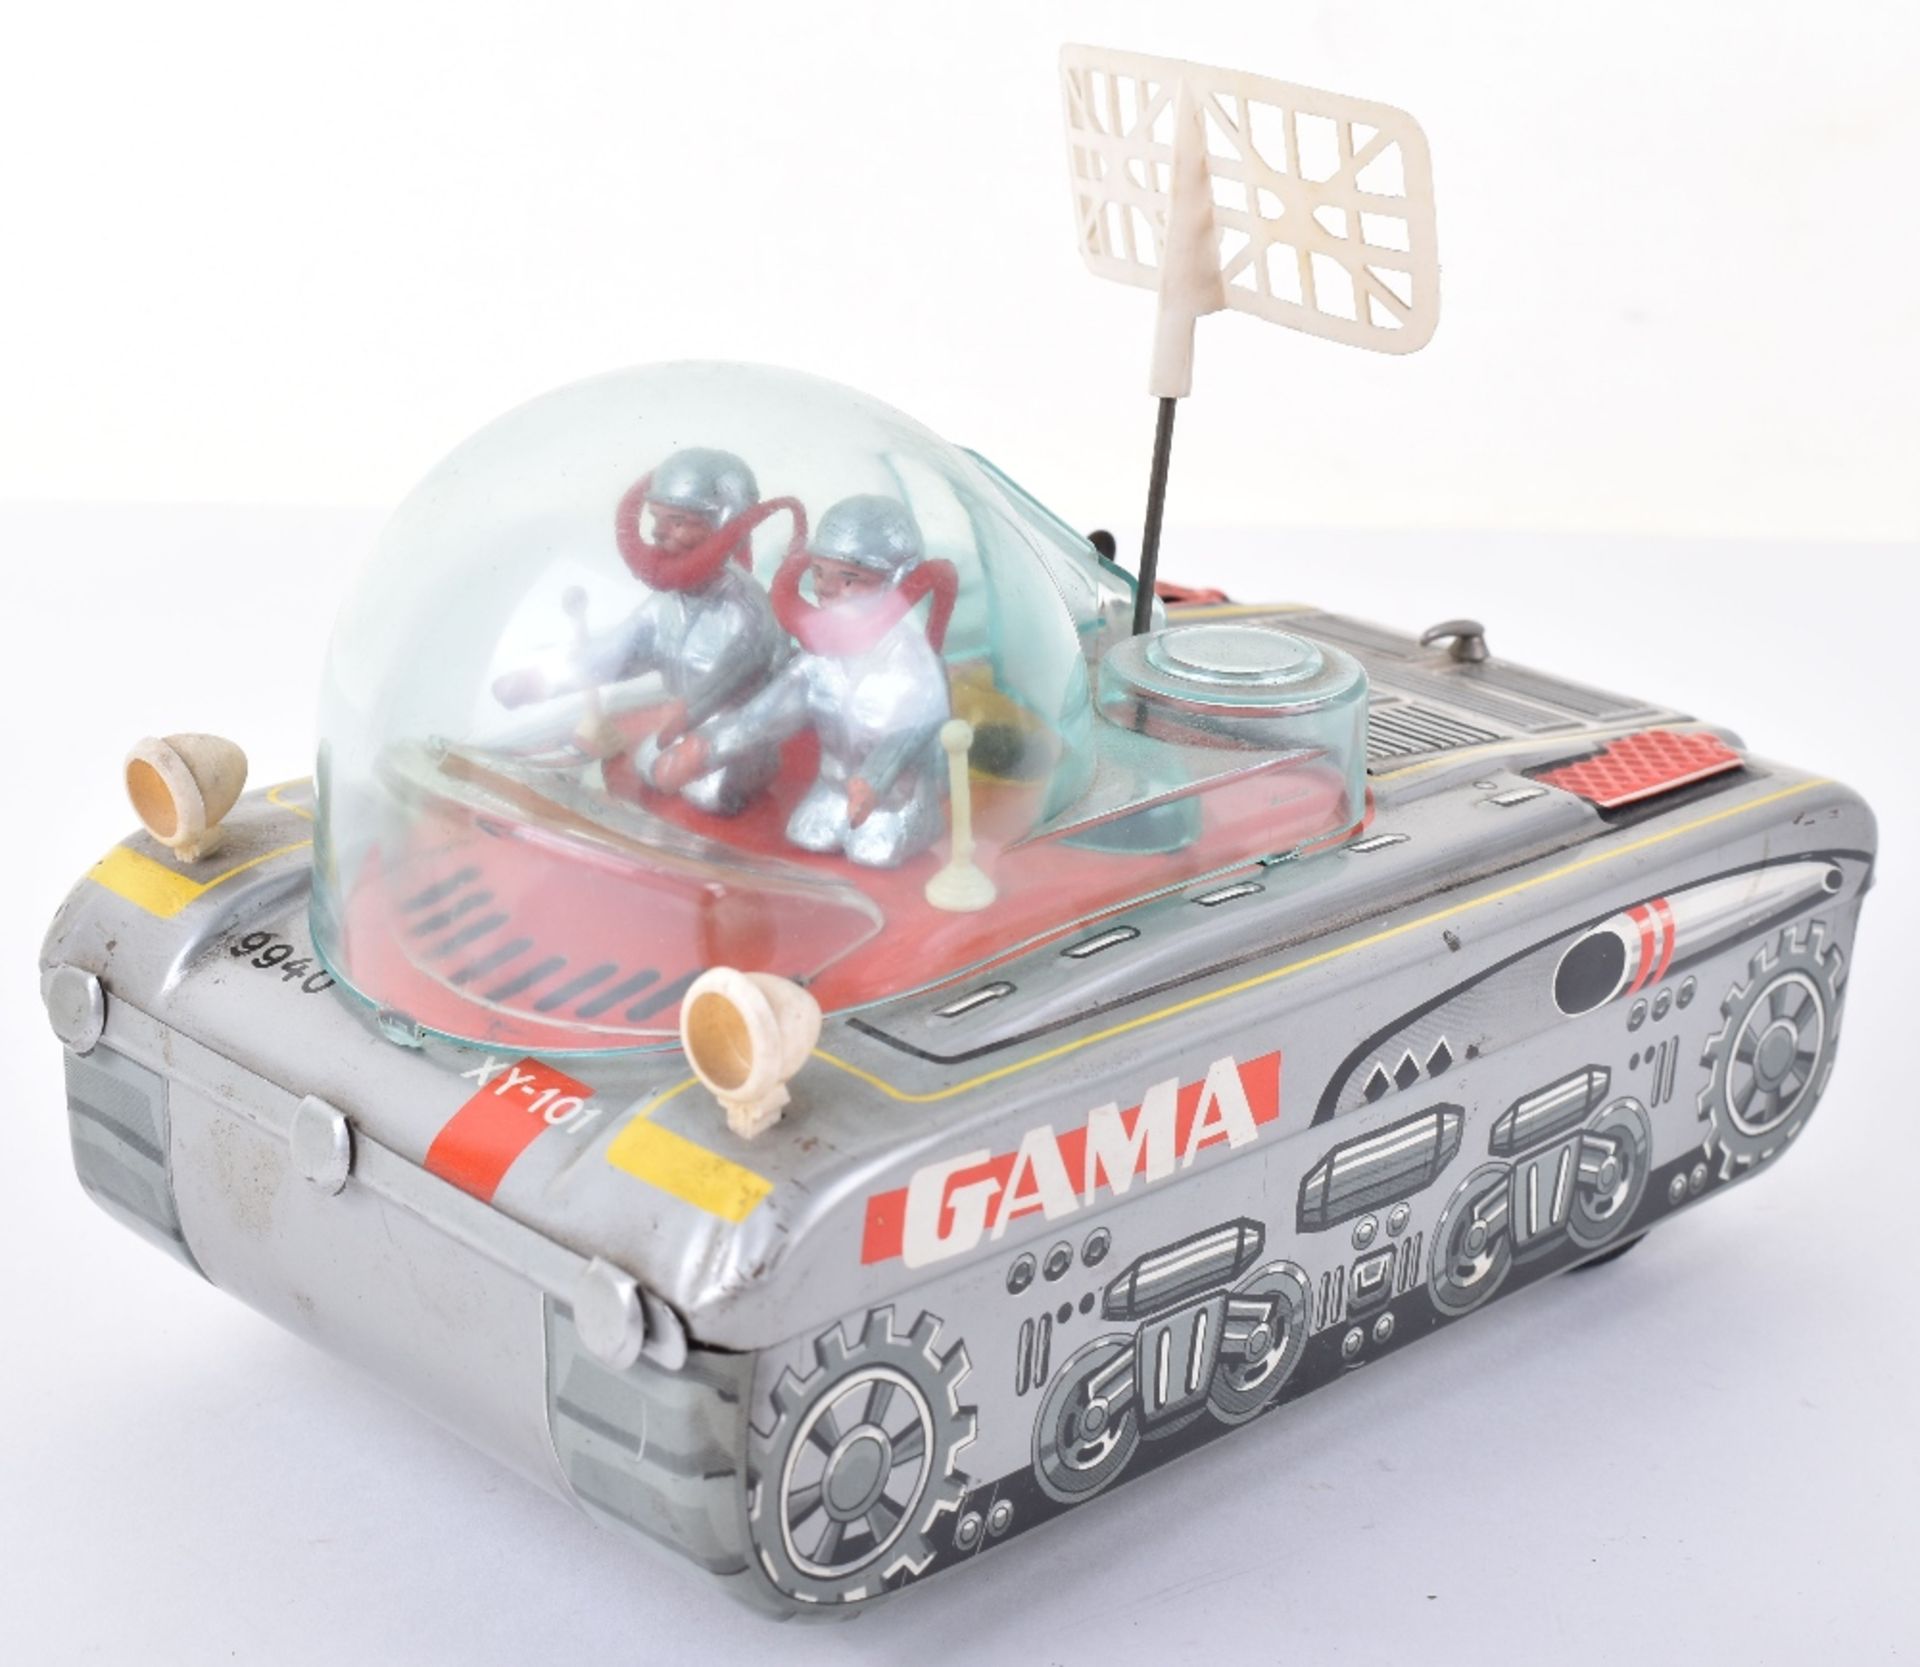 Gama 9940 XY-101 Space Tank tinplate battery operated toy, Western Germany 1960s